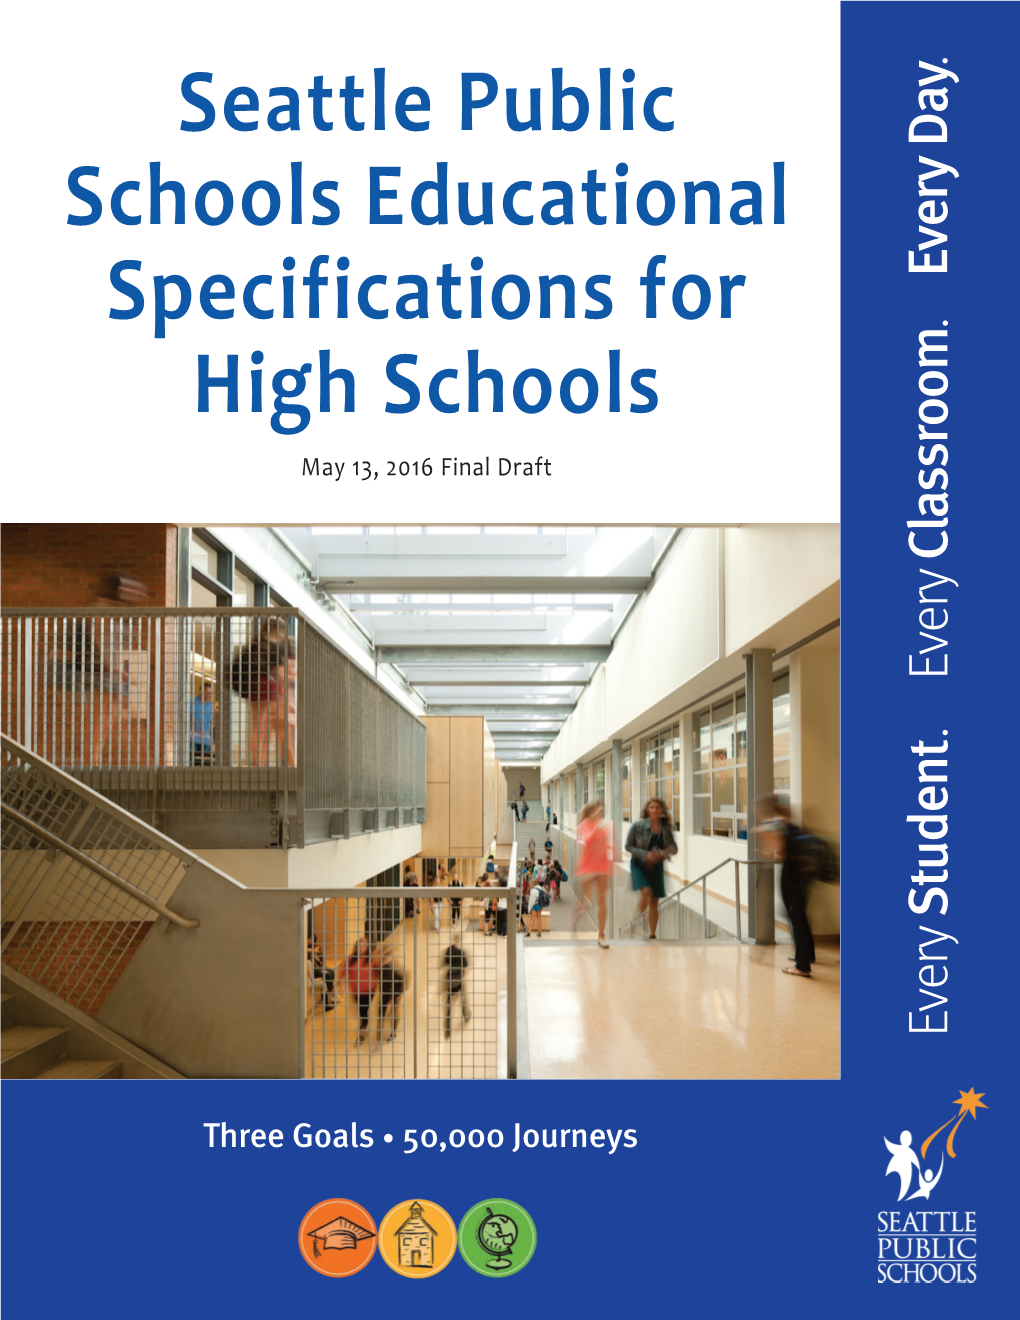 Seattle Public Schools Educational Specifications for High Schools